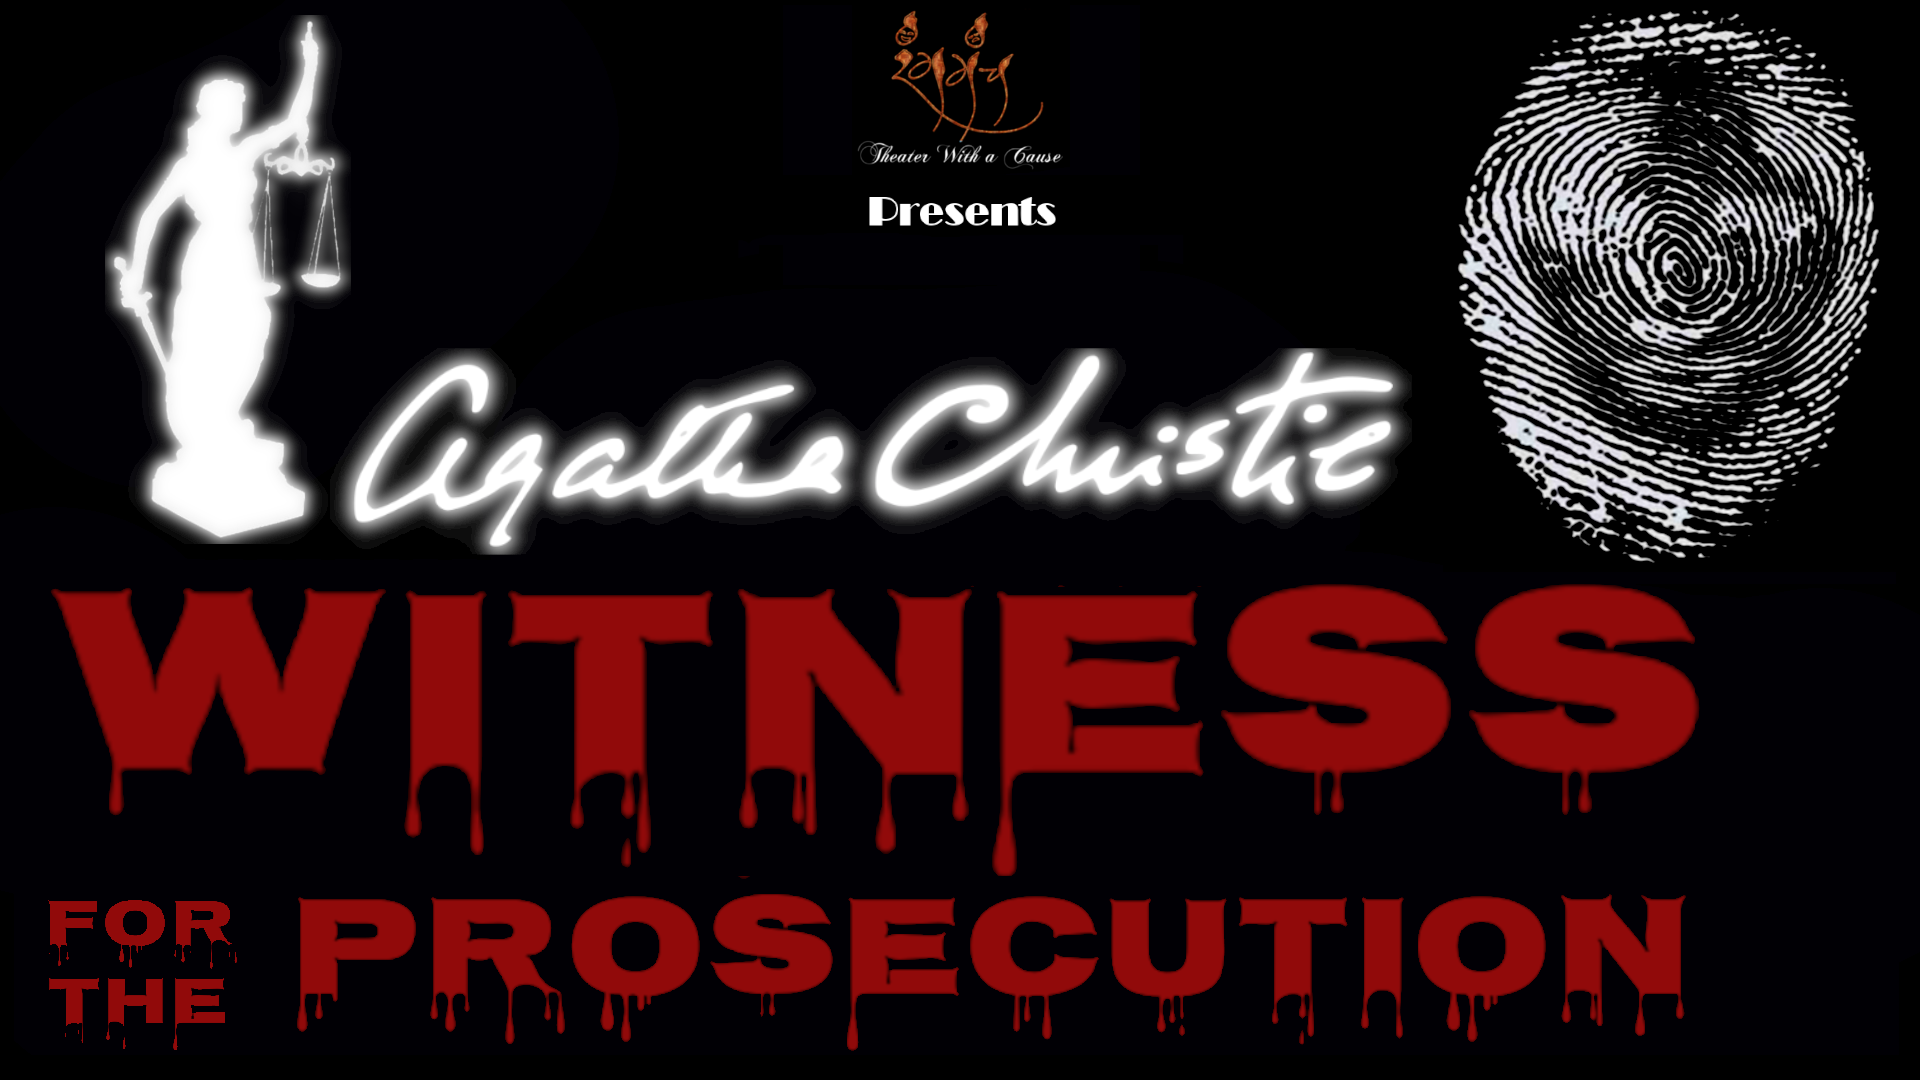 The Witness for prosecution